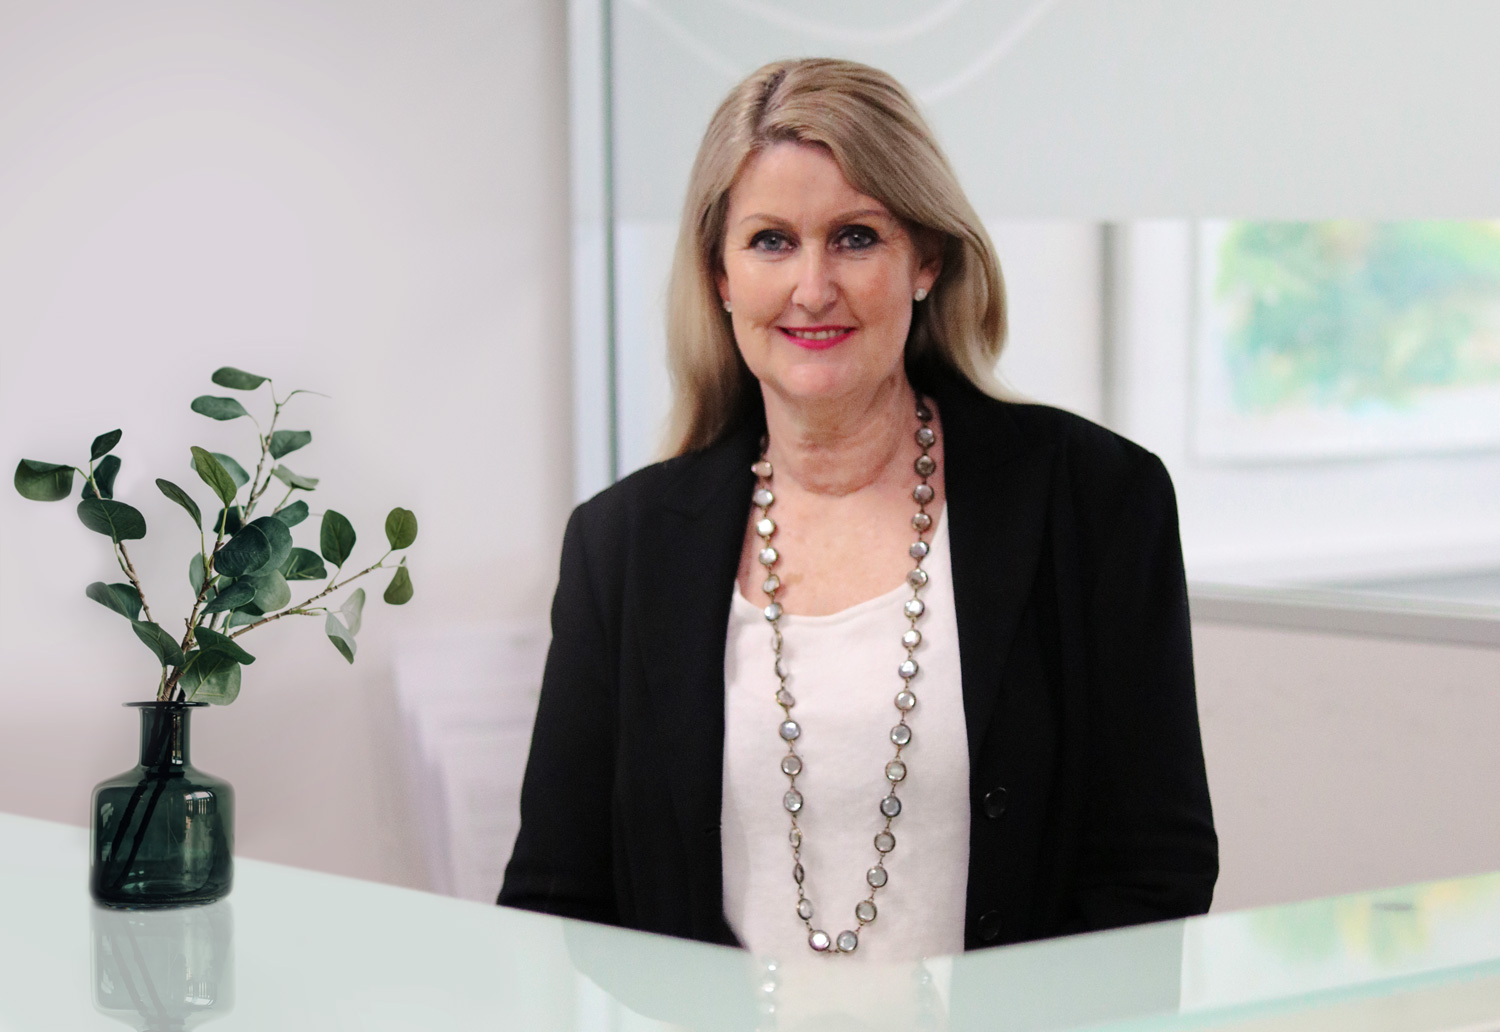 Practice Manager standing at reception. Wearing a black jacket, white top and silver necklace. Reception desk has a small green indoor plant sitting on it.